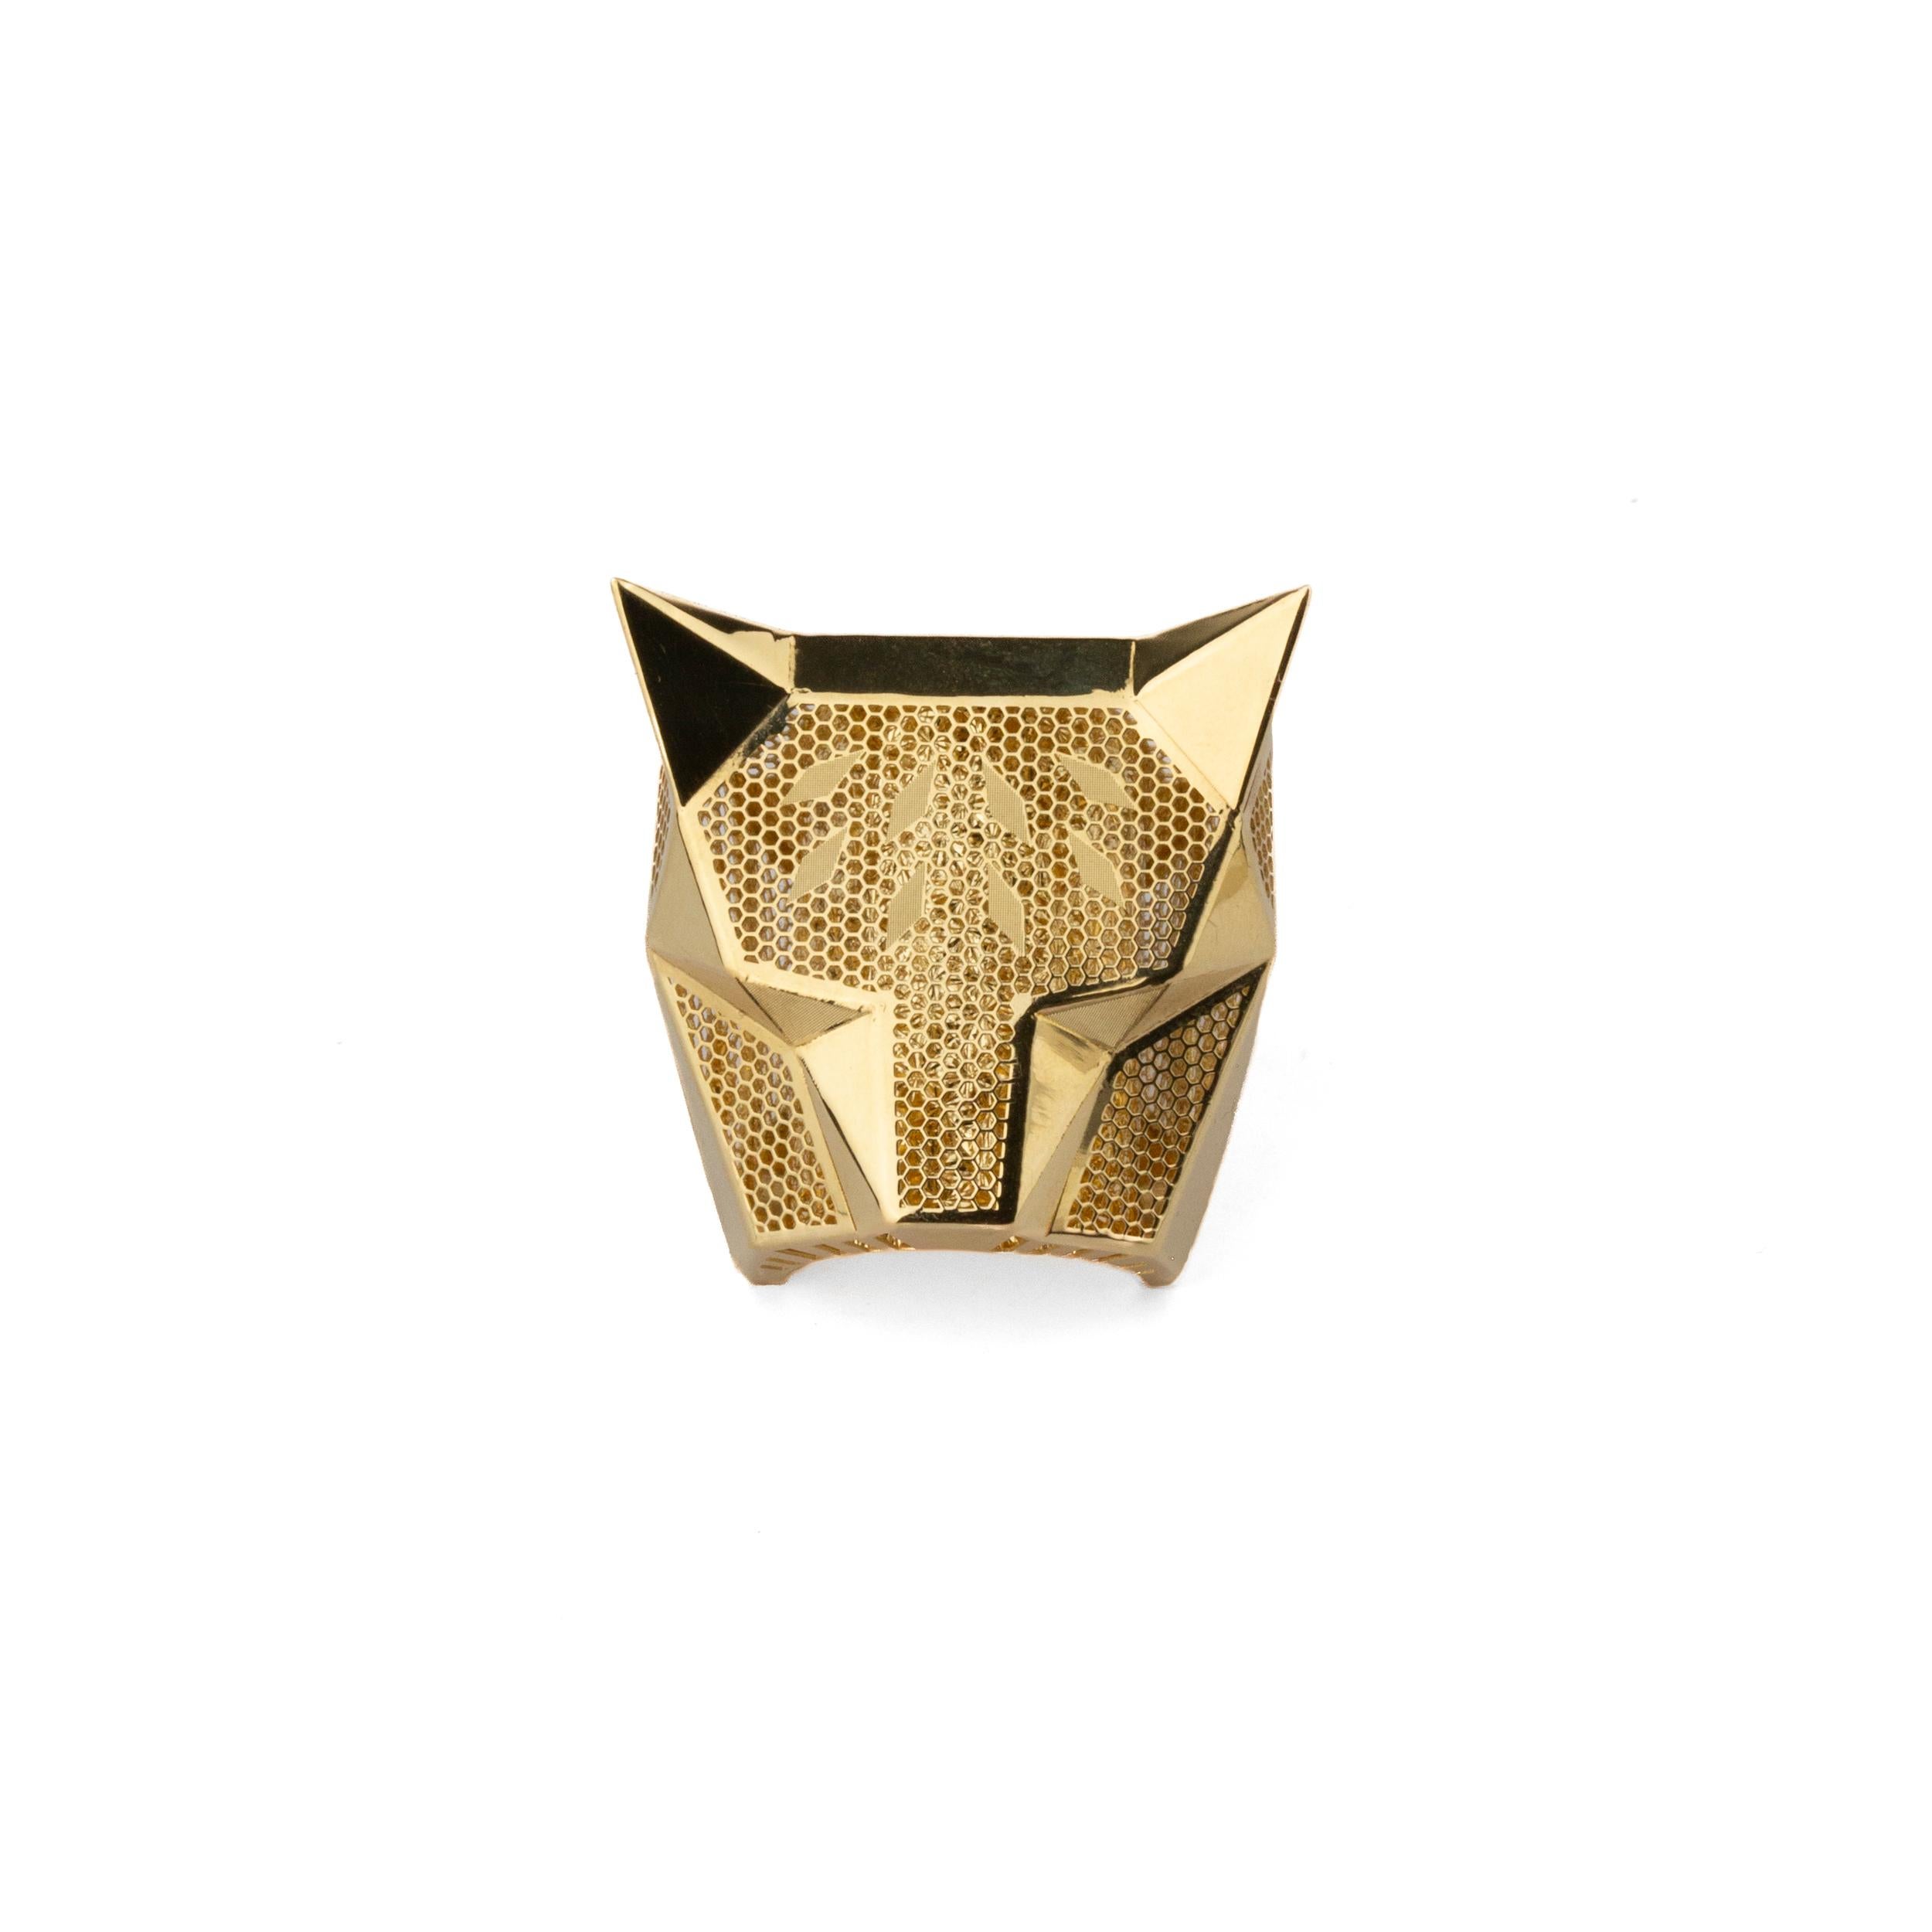 Futuristic Maya Culture Jaguar 18kgold Ring
Elena Estaun recreates a beautiful and futuristic Jaguar / Balam that is light in construction and has a very well designed futuristic tone.  Unique in Proportions and Feeling this ring will make a